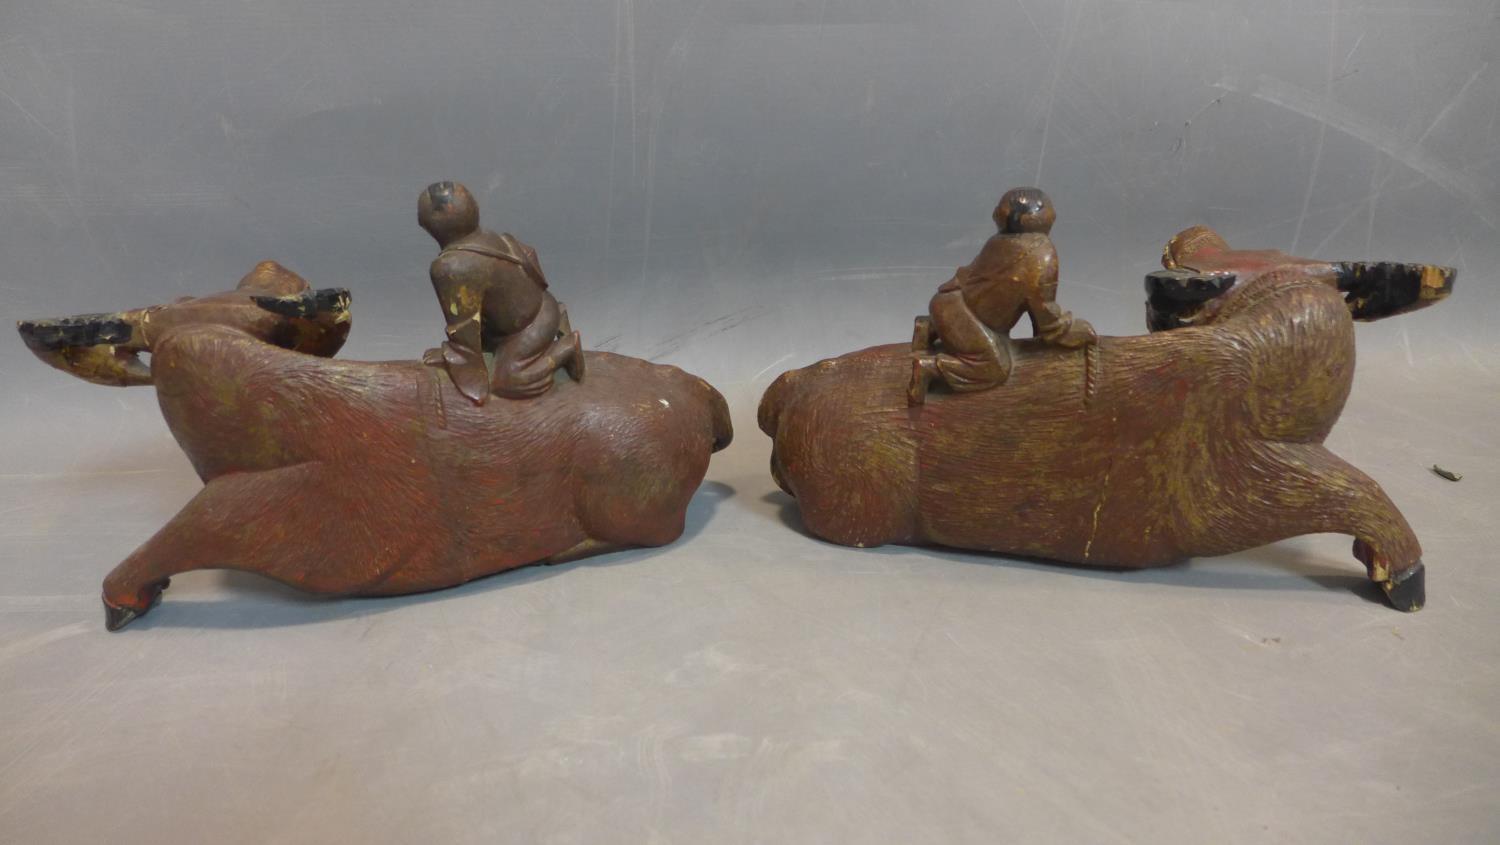 Two Chinese wooden sculptures of a child riding on water buffalo, second half 19th century - Image 4 of 4